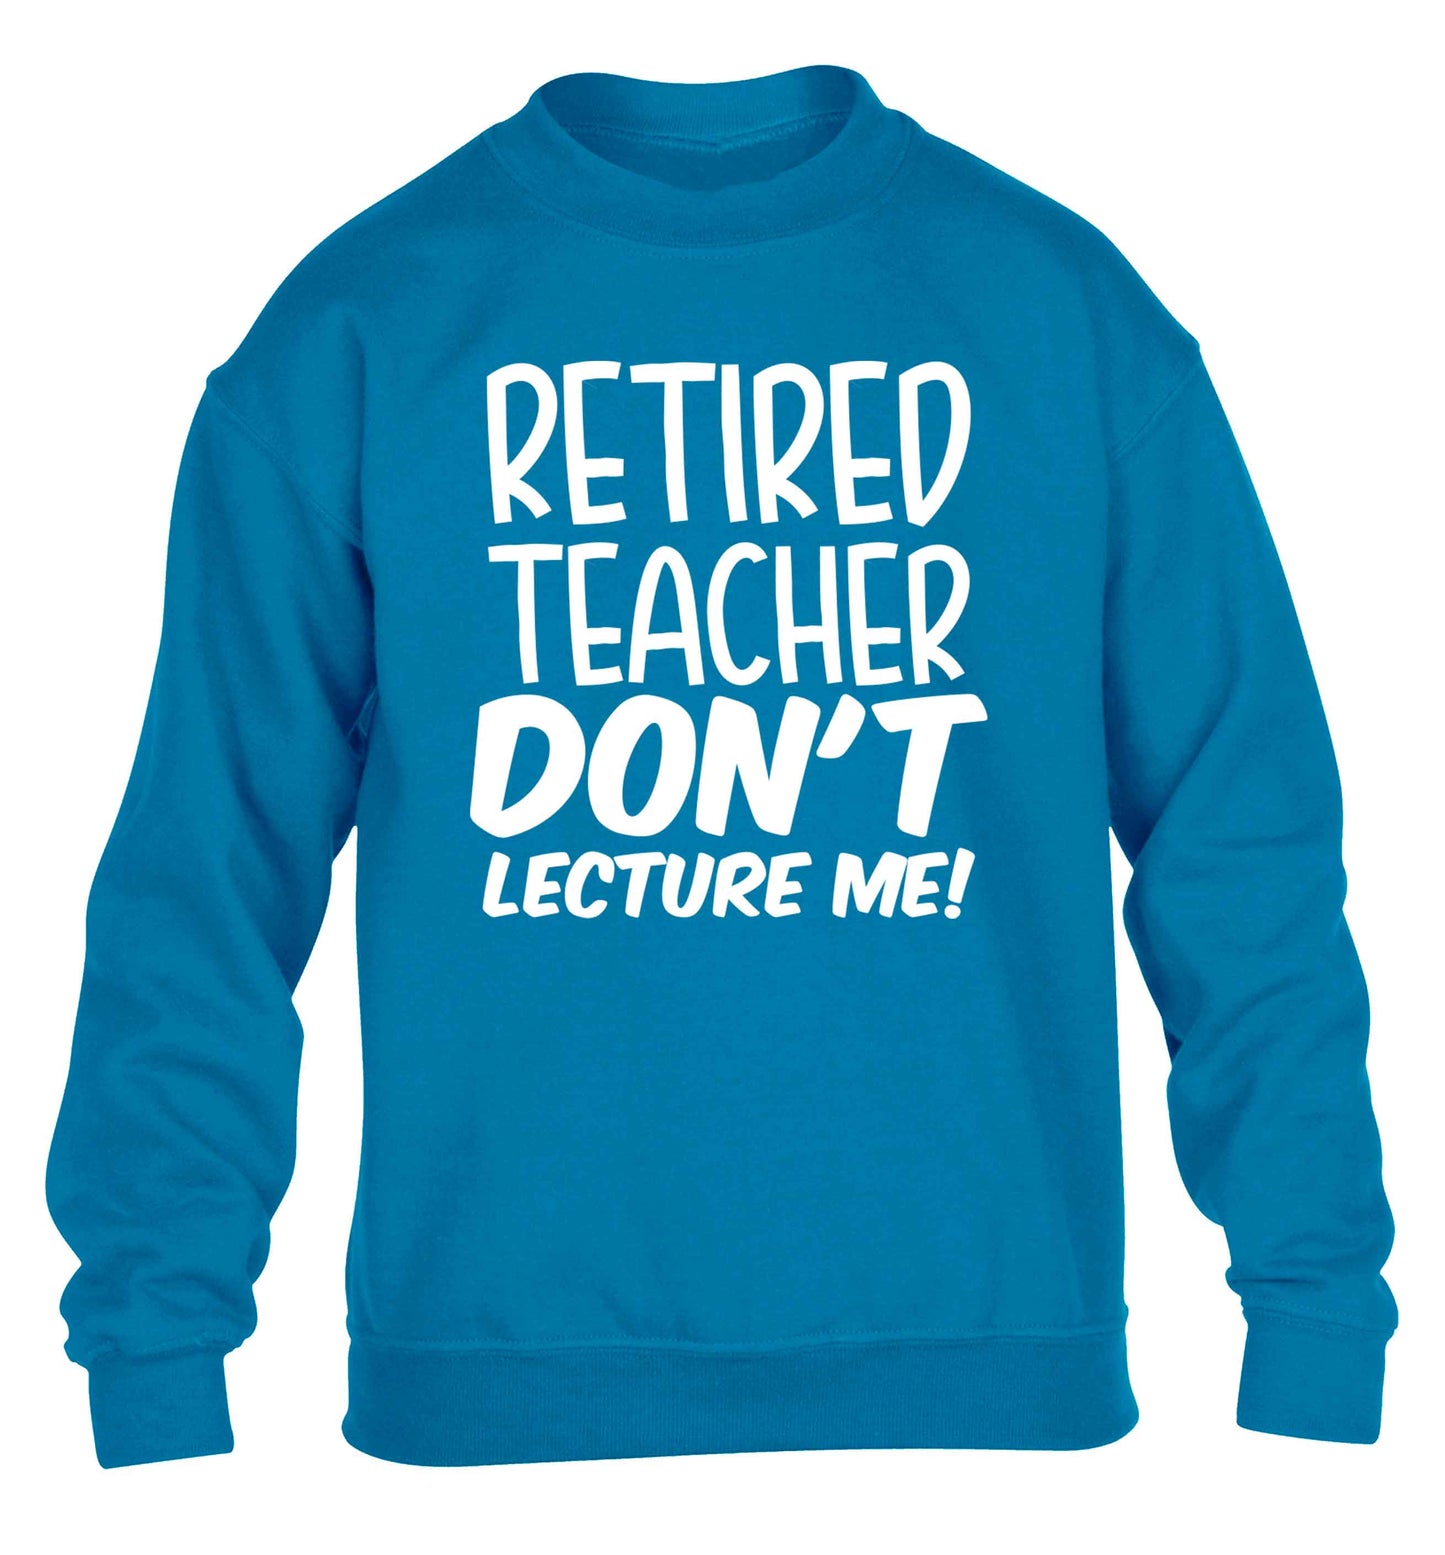 Retired teacher don't lecture me! children's blue sweater 12-13 Years